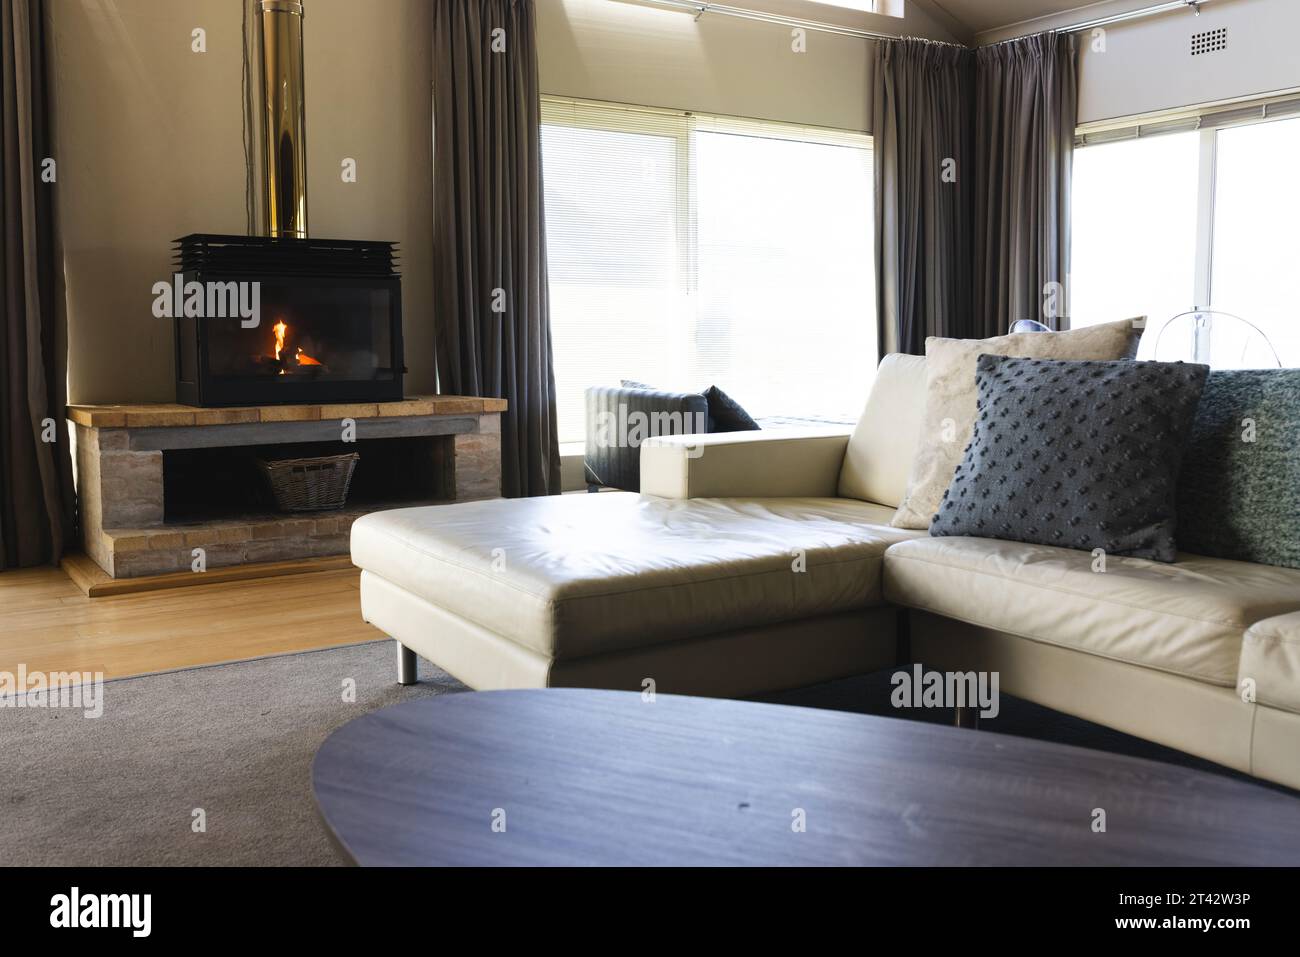 General view of living room with sofa and fireplace Stock Photo